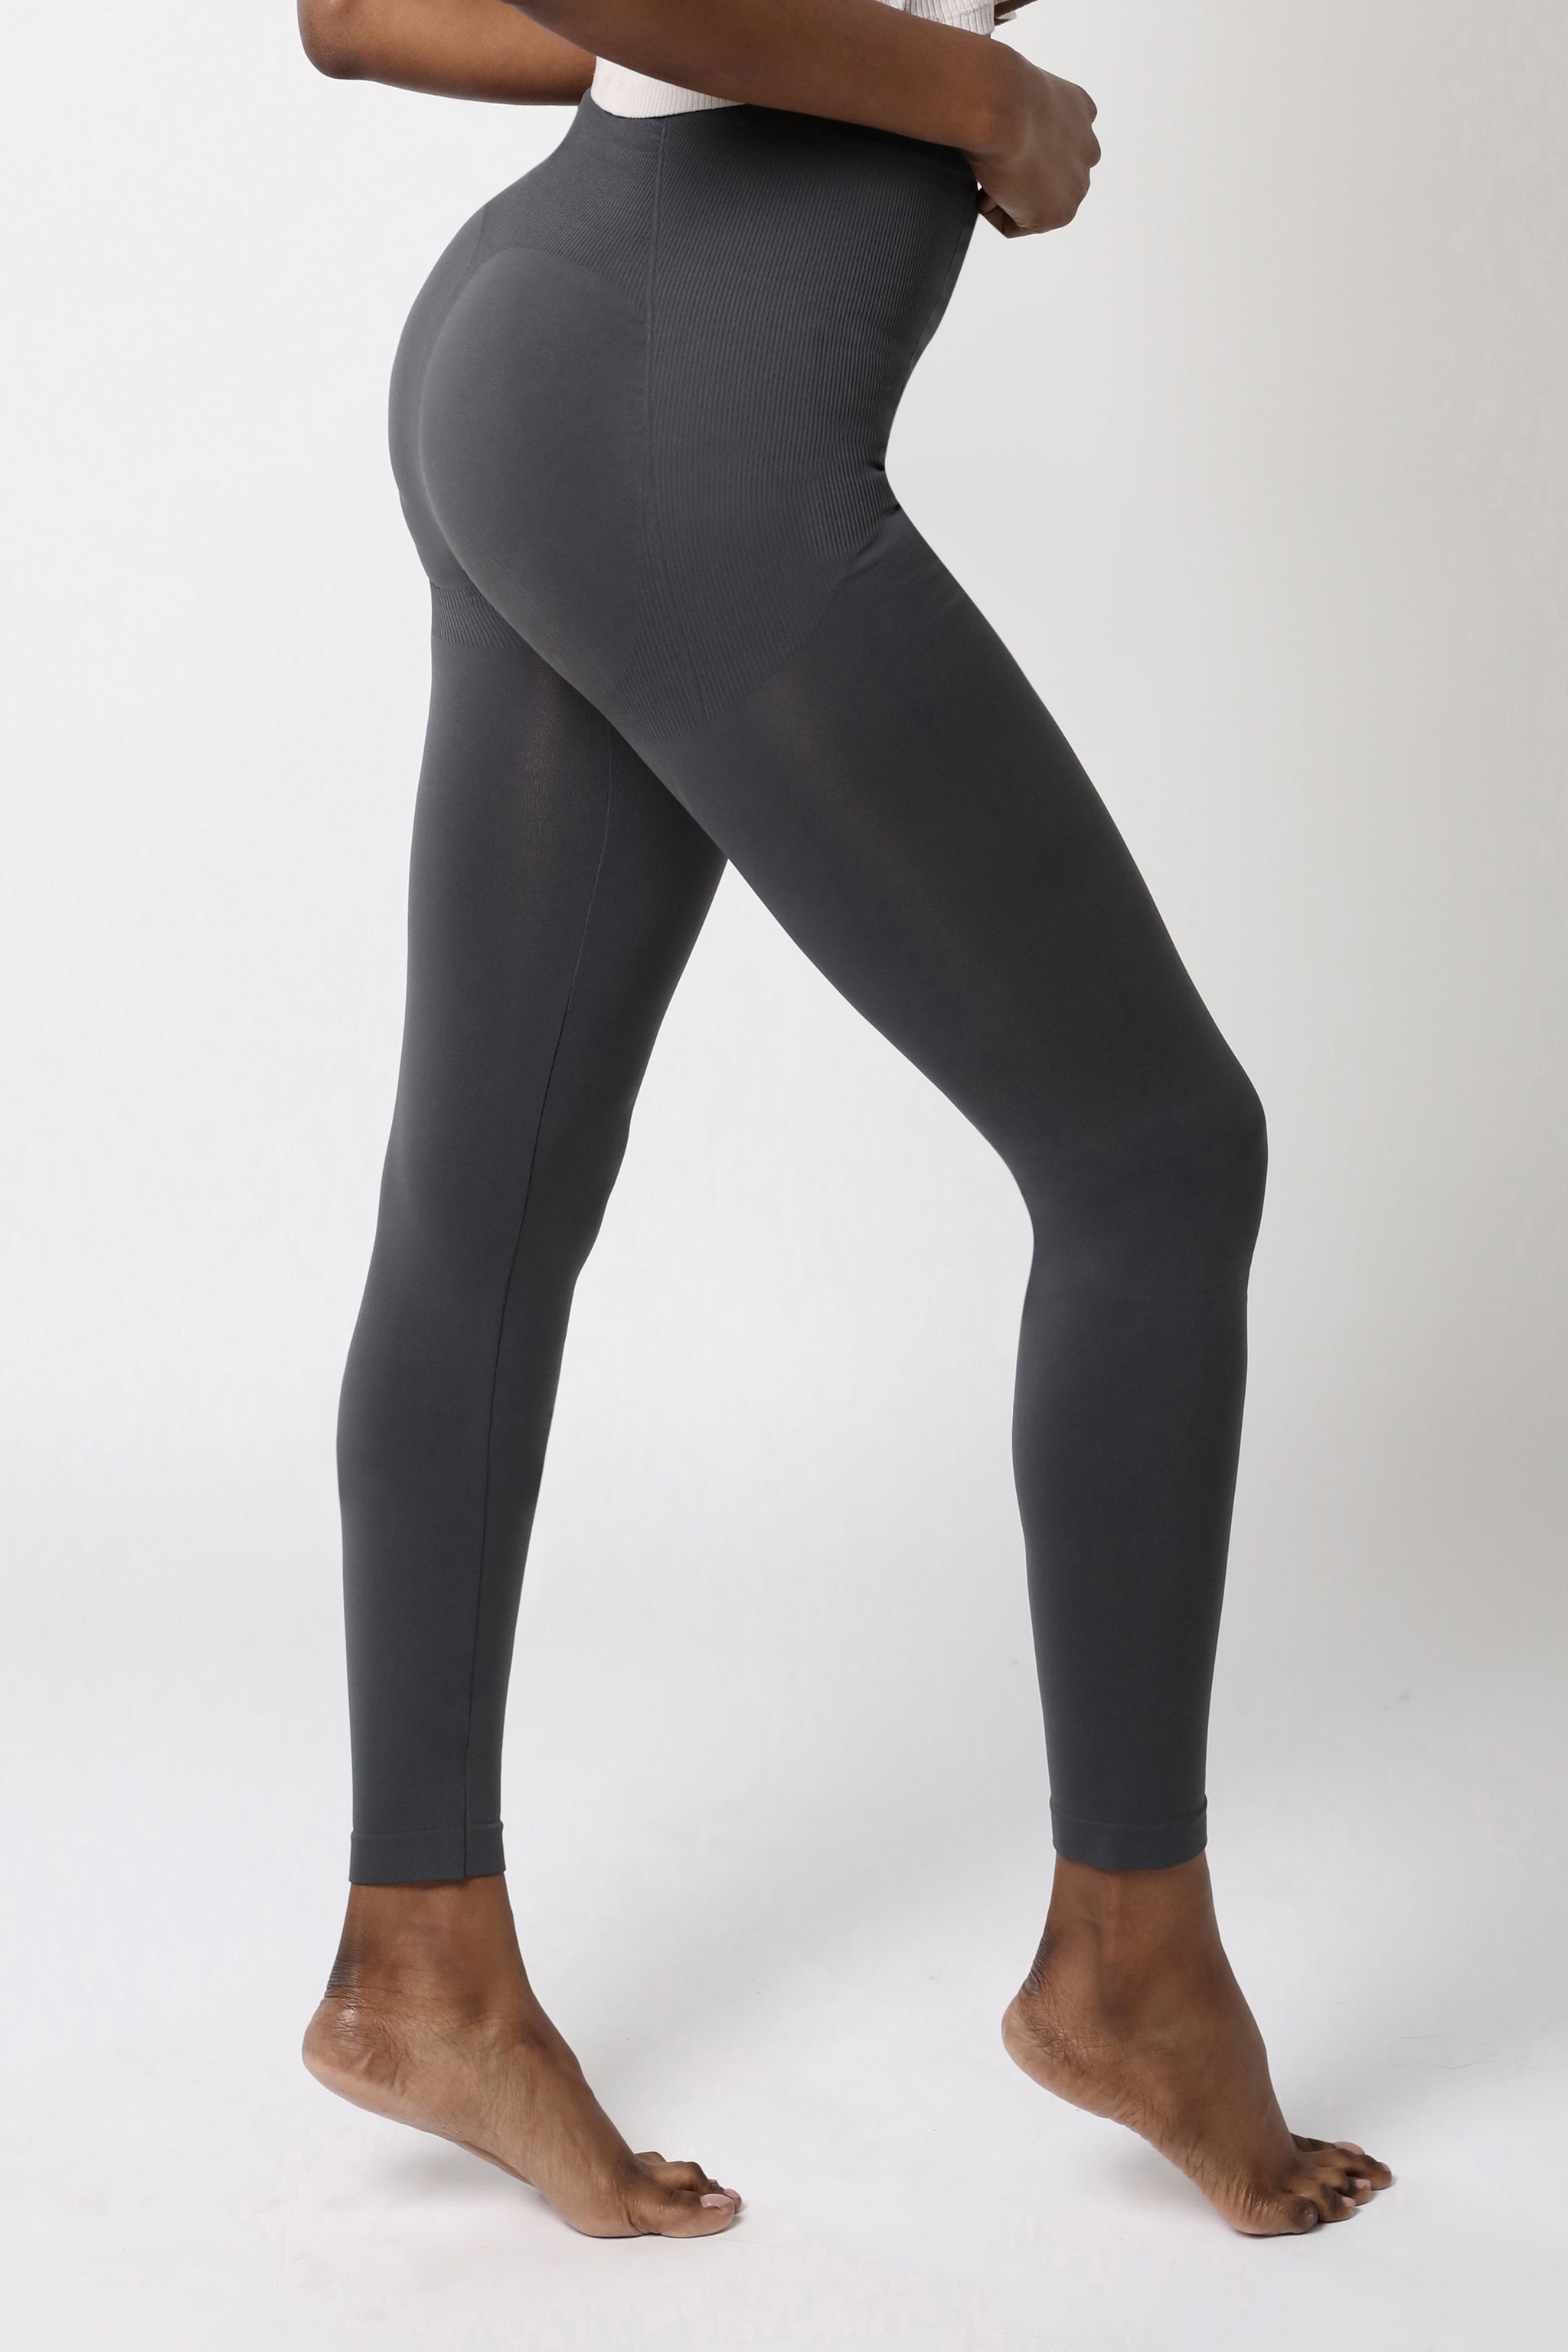 side view of tummy control legging - Charcoal grey